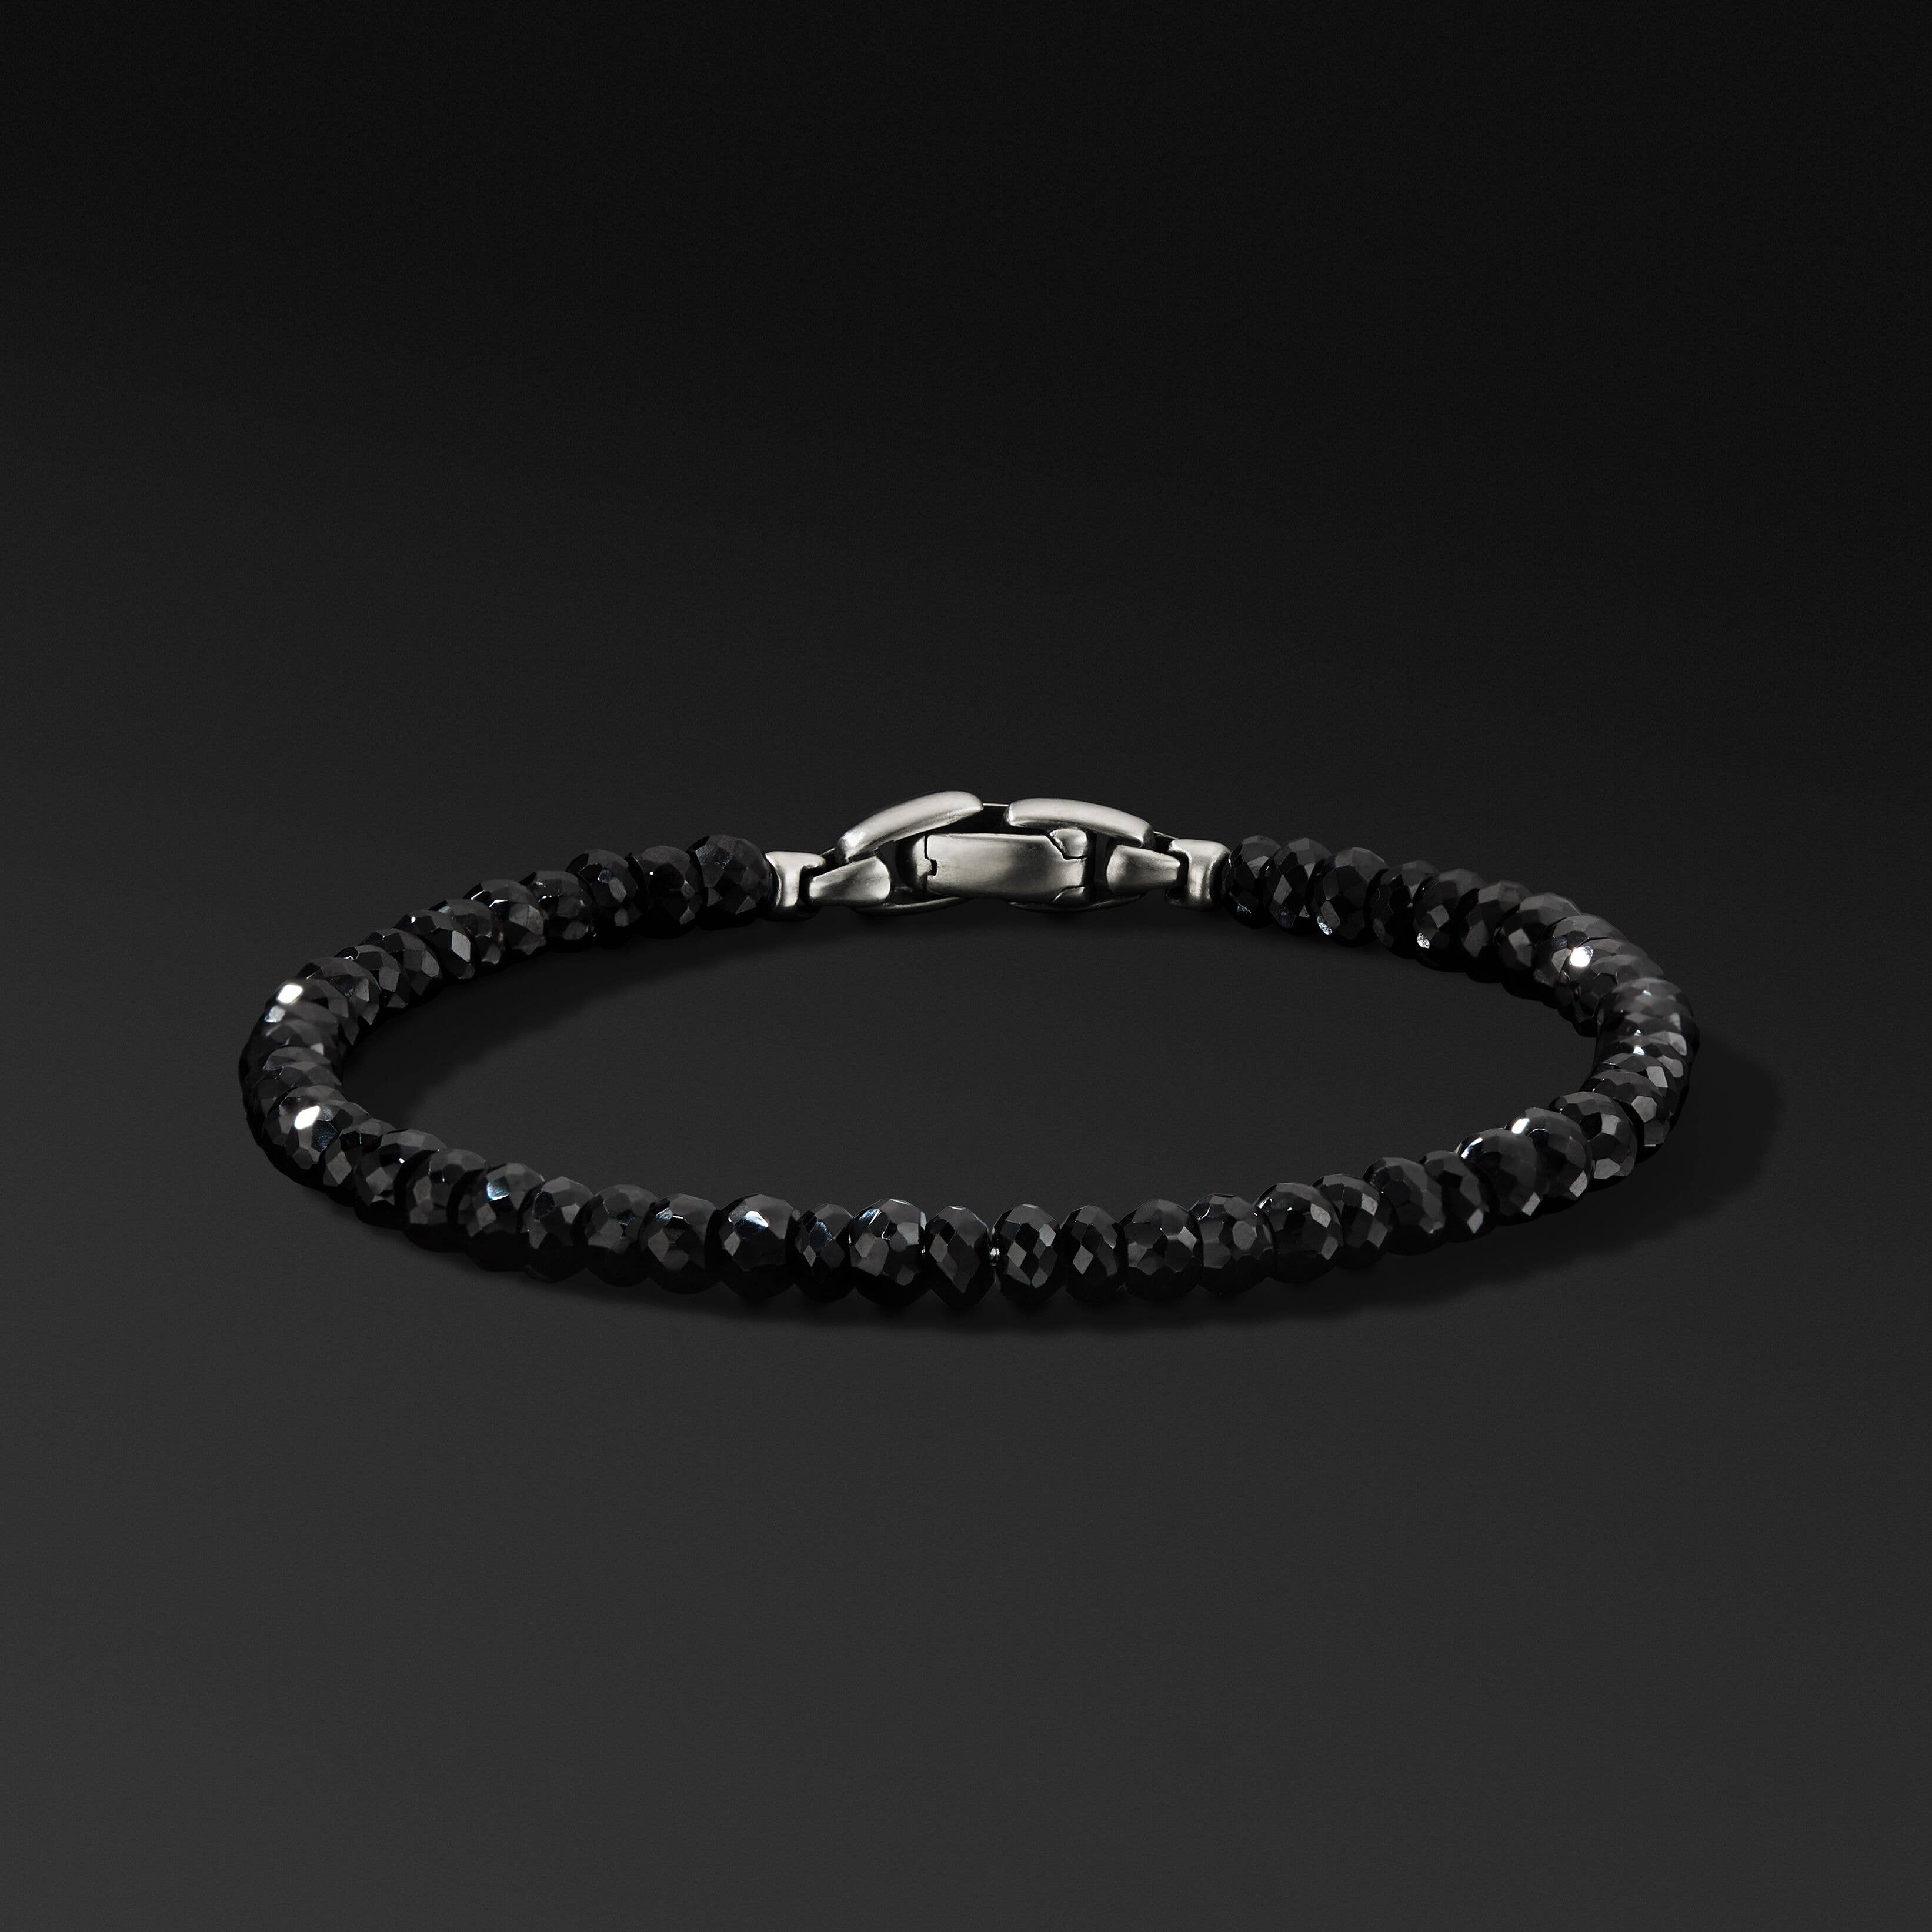 Spiritual Beads Faceted Bracelet in Sterling Silver with Black Spinel